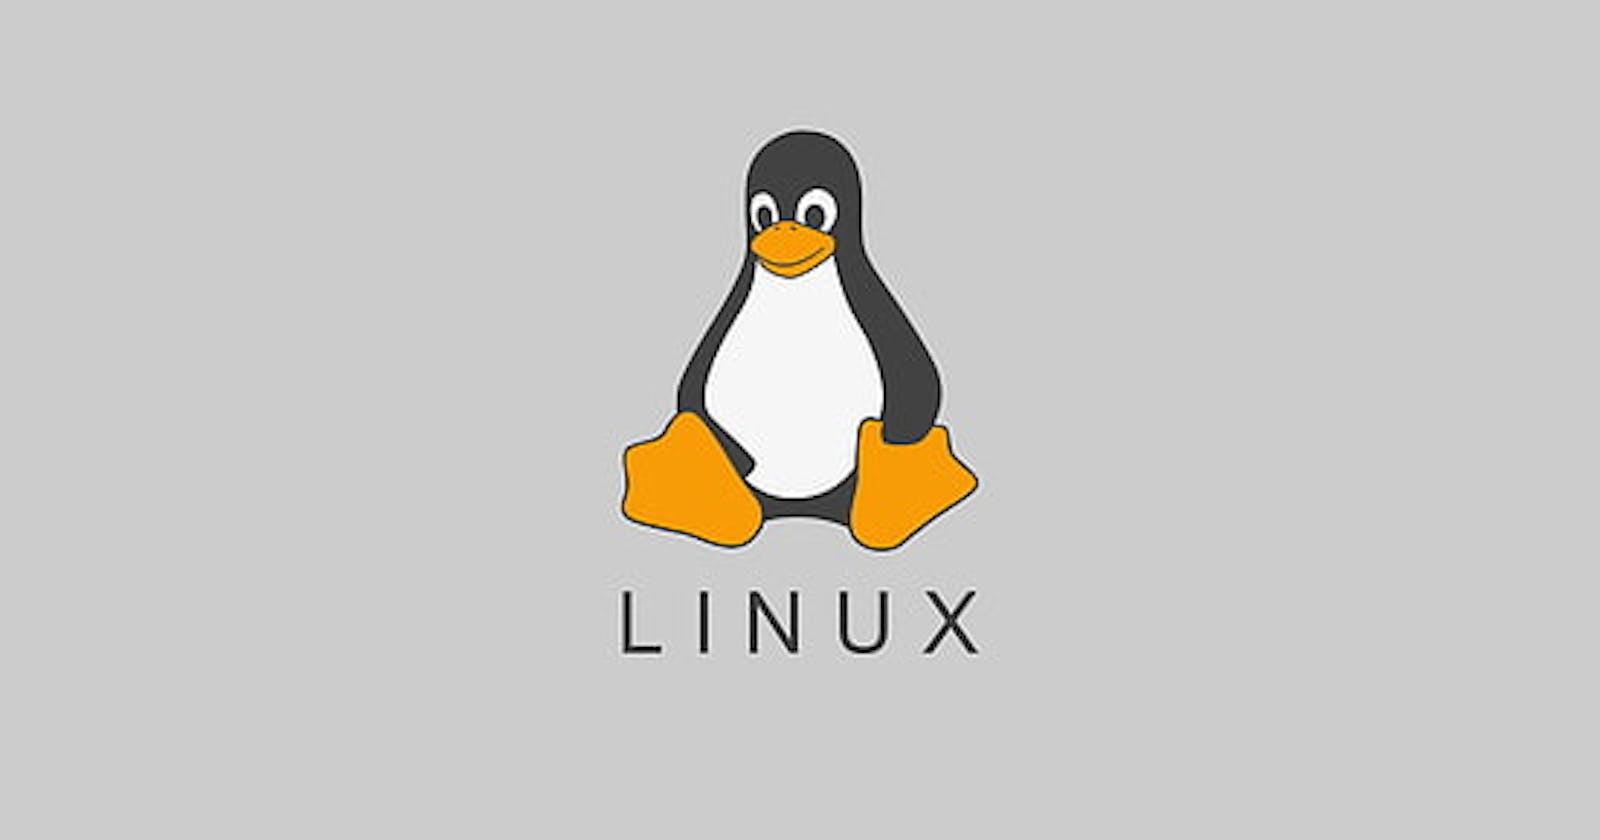 Absolute basic linux command-line skills